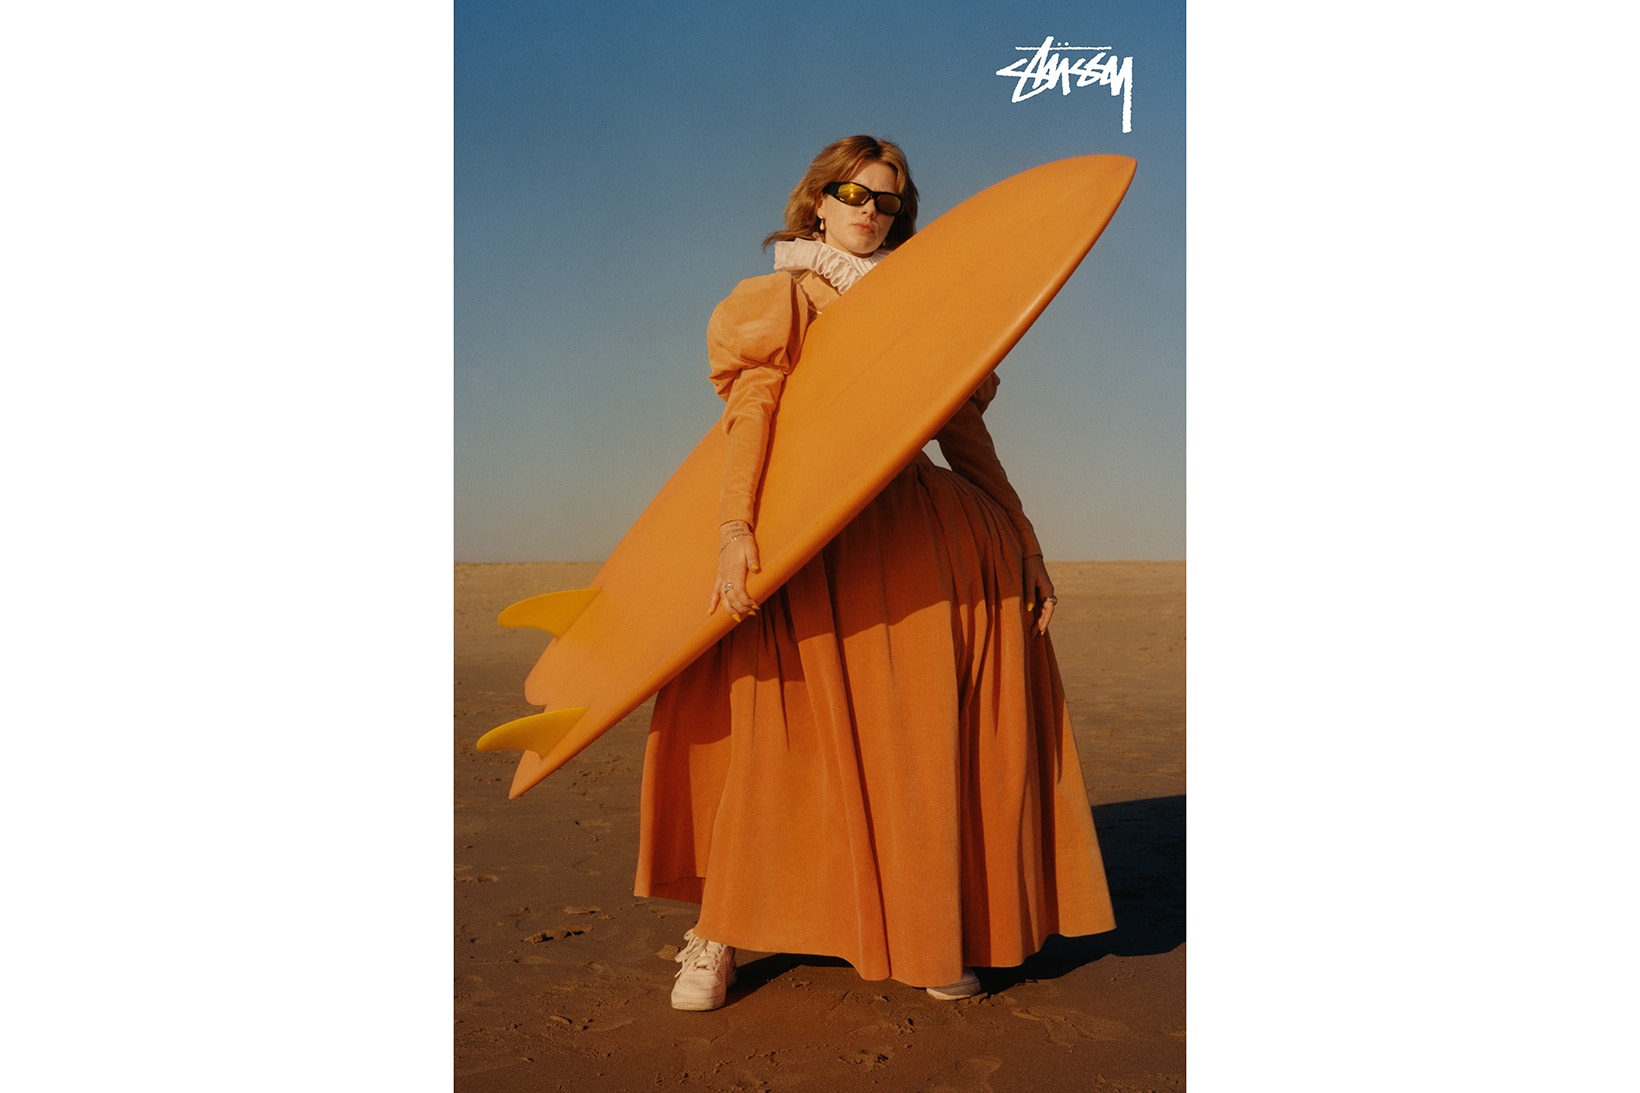 stussy spring 2020 californian knights campaign joust duel surrealism